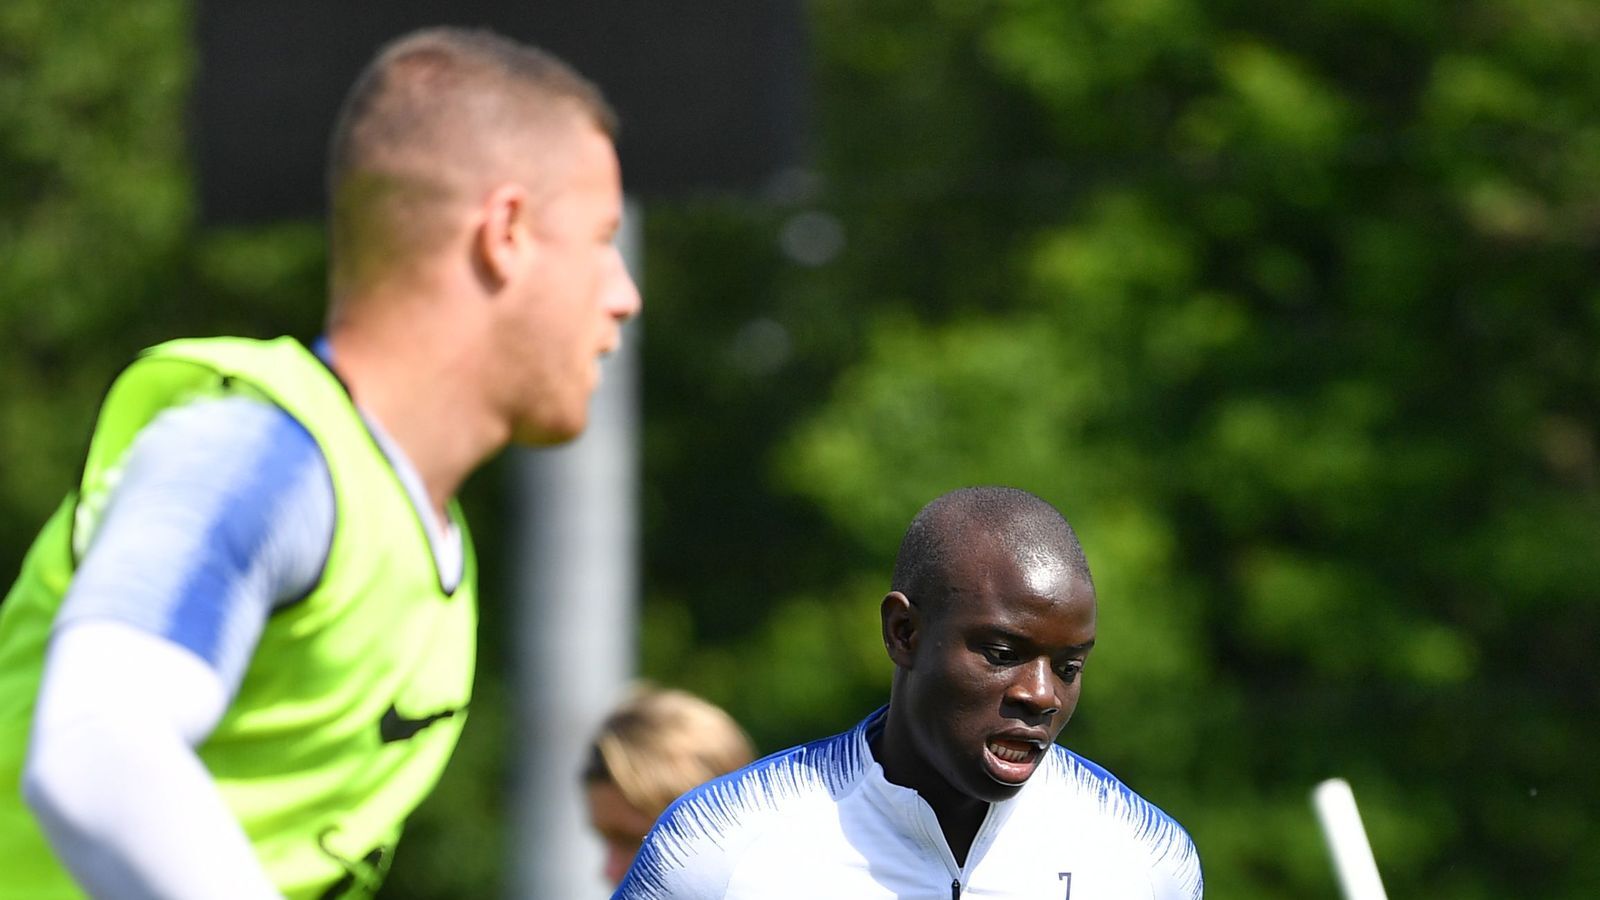 Kante Returns to Contact Training amidst Questions of His Standing within Chelsea